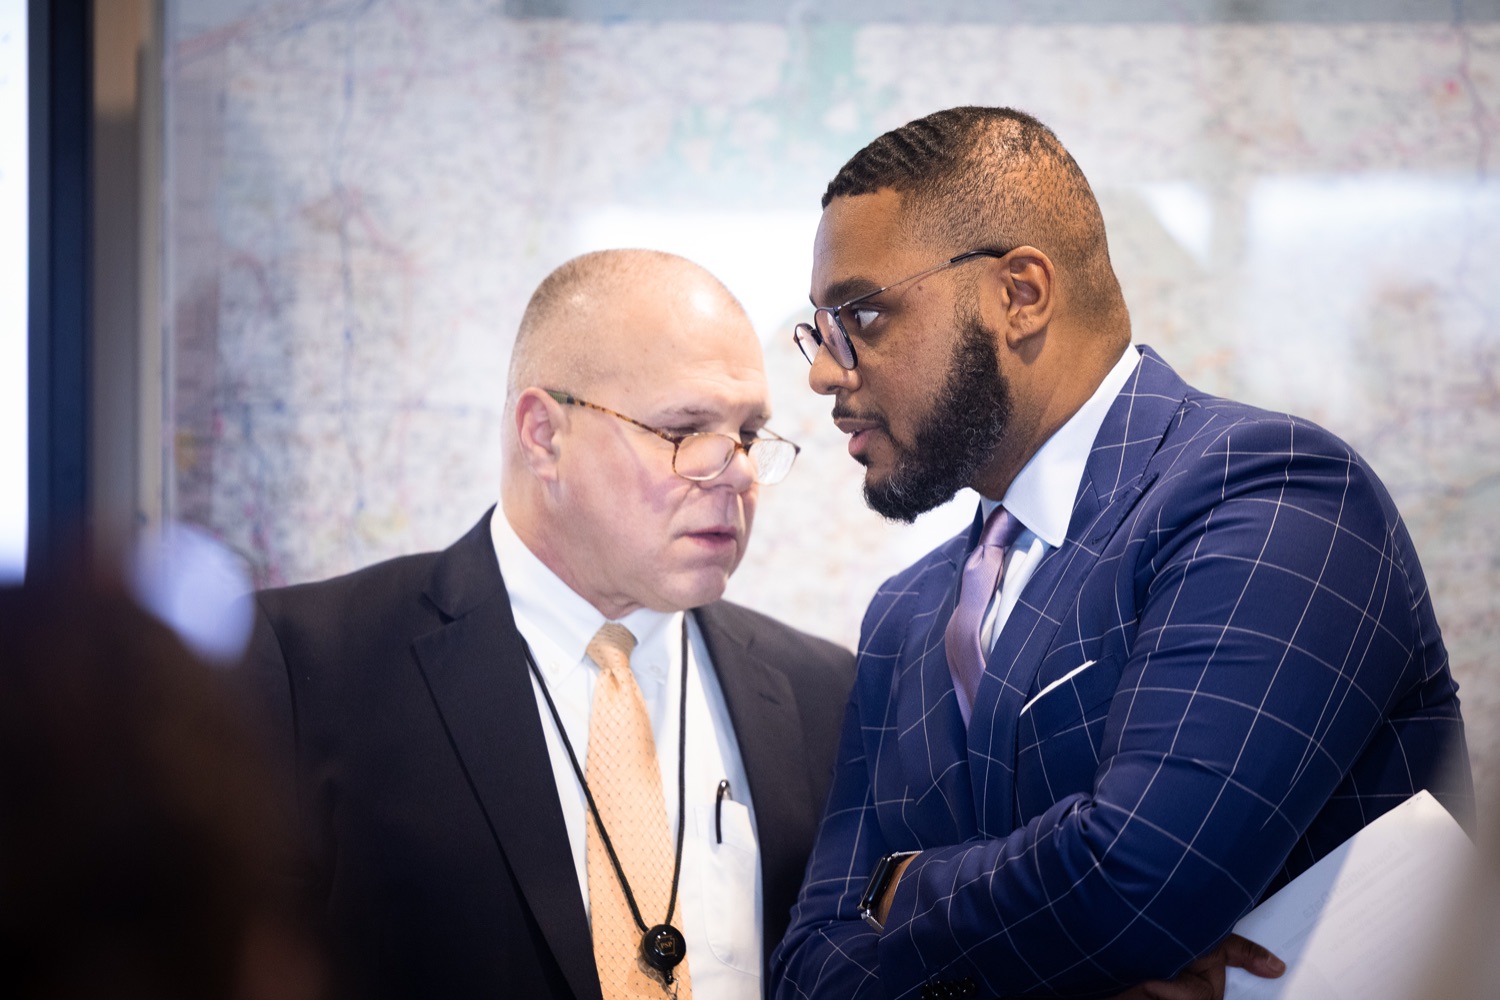 Lt. Governor Austin Davis consulting with emergency management officials before Governor Shapiros update on East Palestine train derailment from the PEMA media center.  FEBRUARY 06, 2023 - HARRISBURG, PA<br><a href="https://filesource.amperwave.net/commonwealthofpa/photo/22620_gov_trainDerailment_dz_016.JPG" target="_blank">⇣ Download Photo</a>